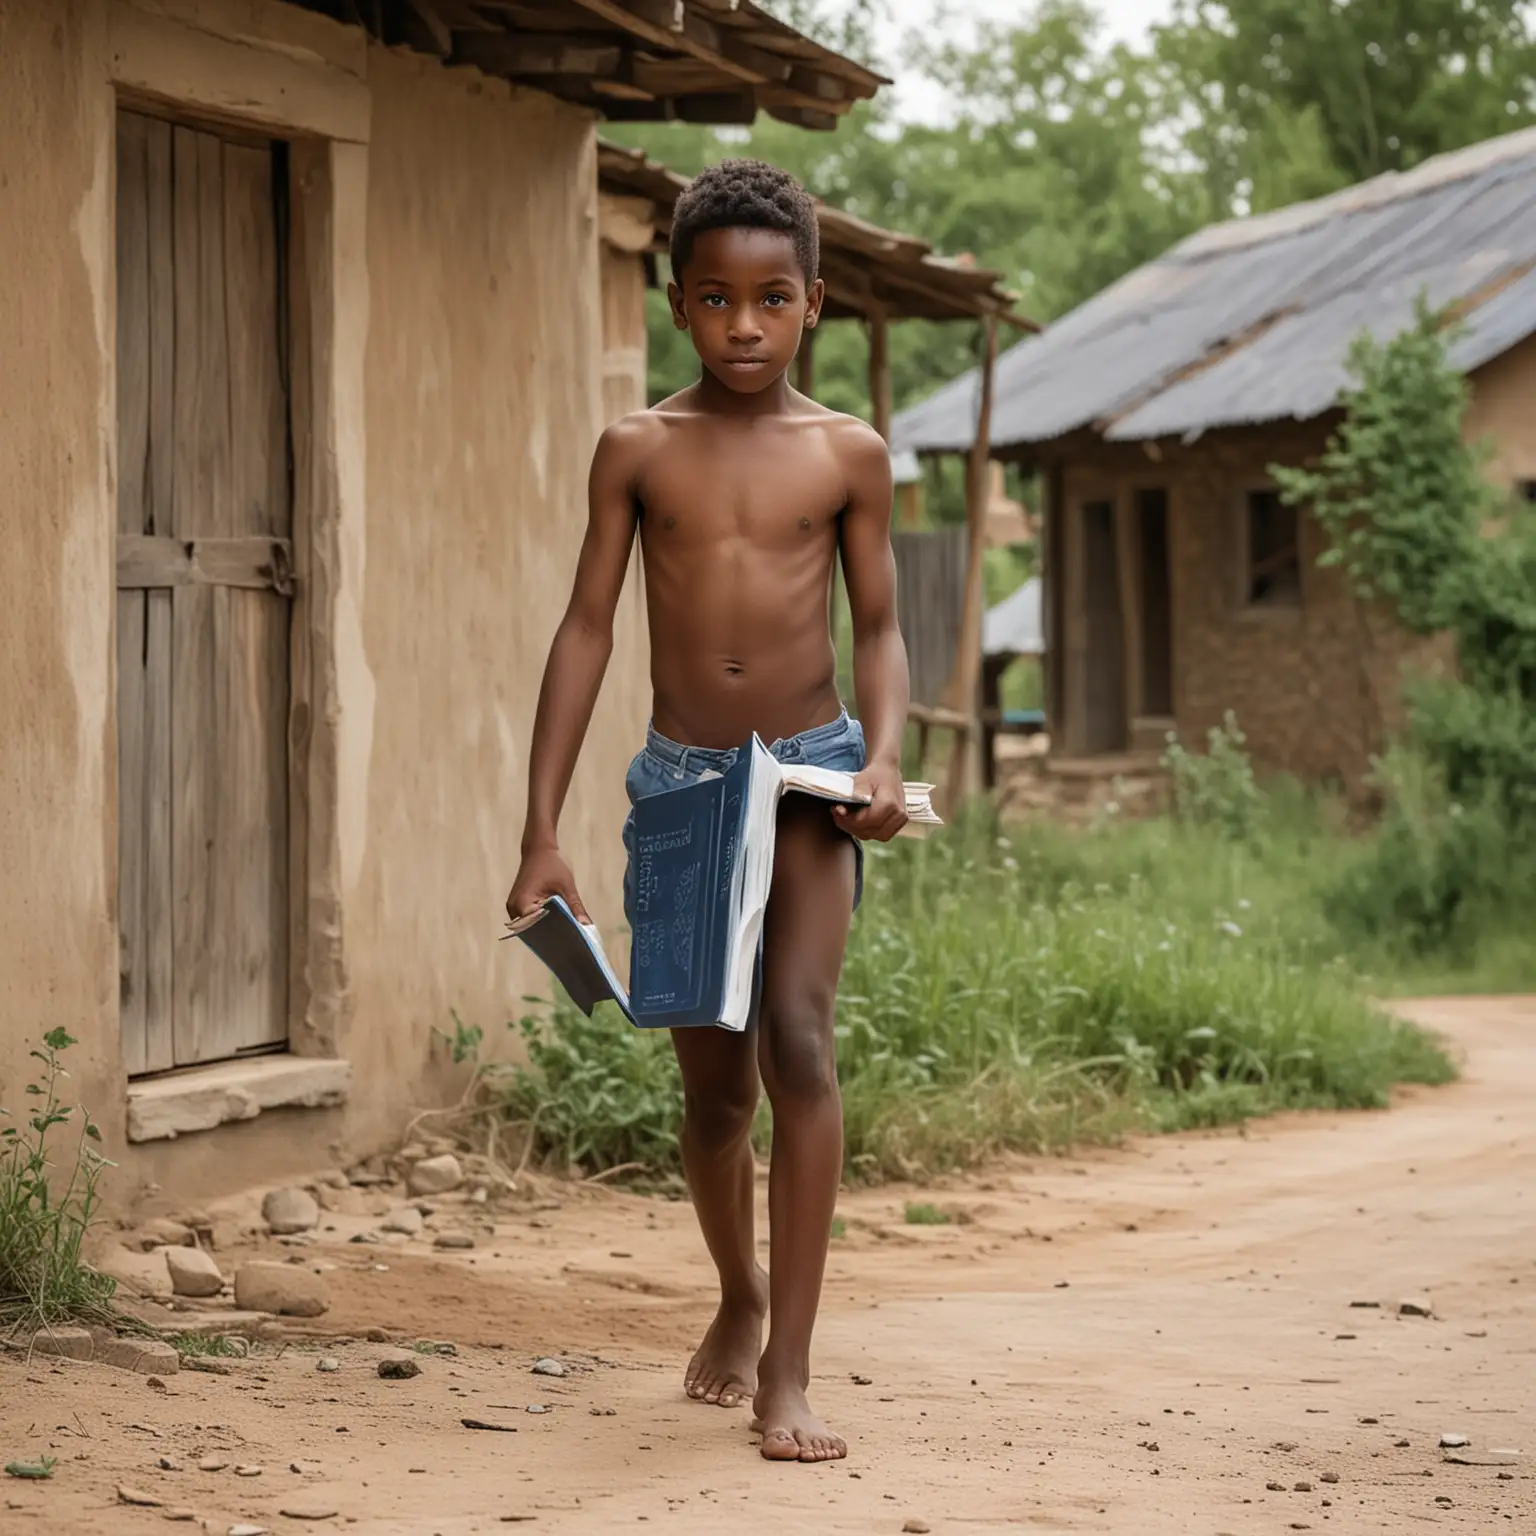 shirtless black boy barefoot with blue short holding book in village